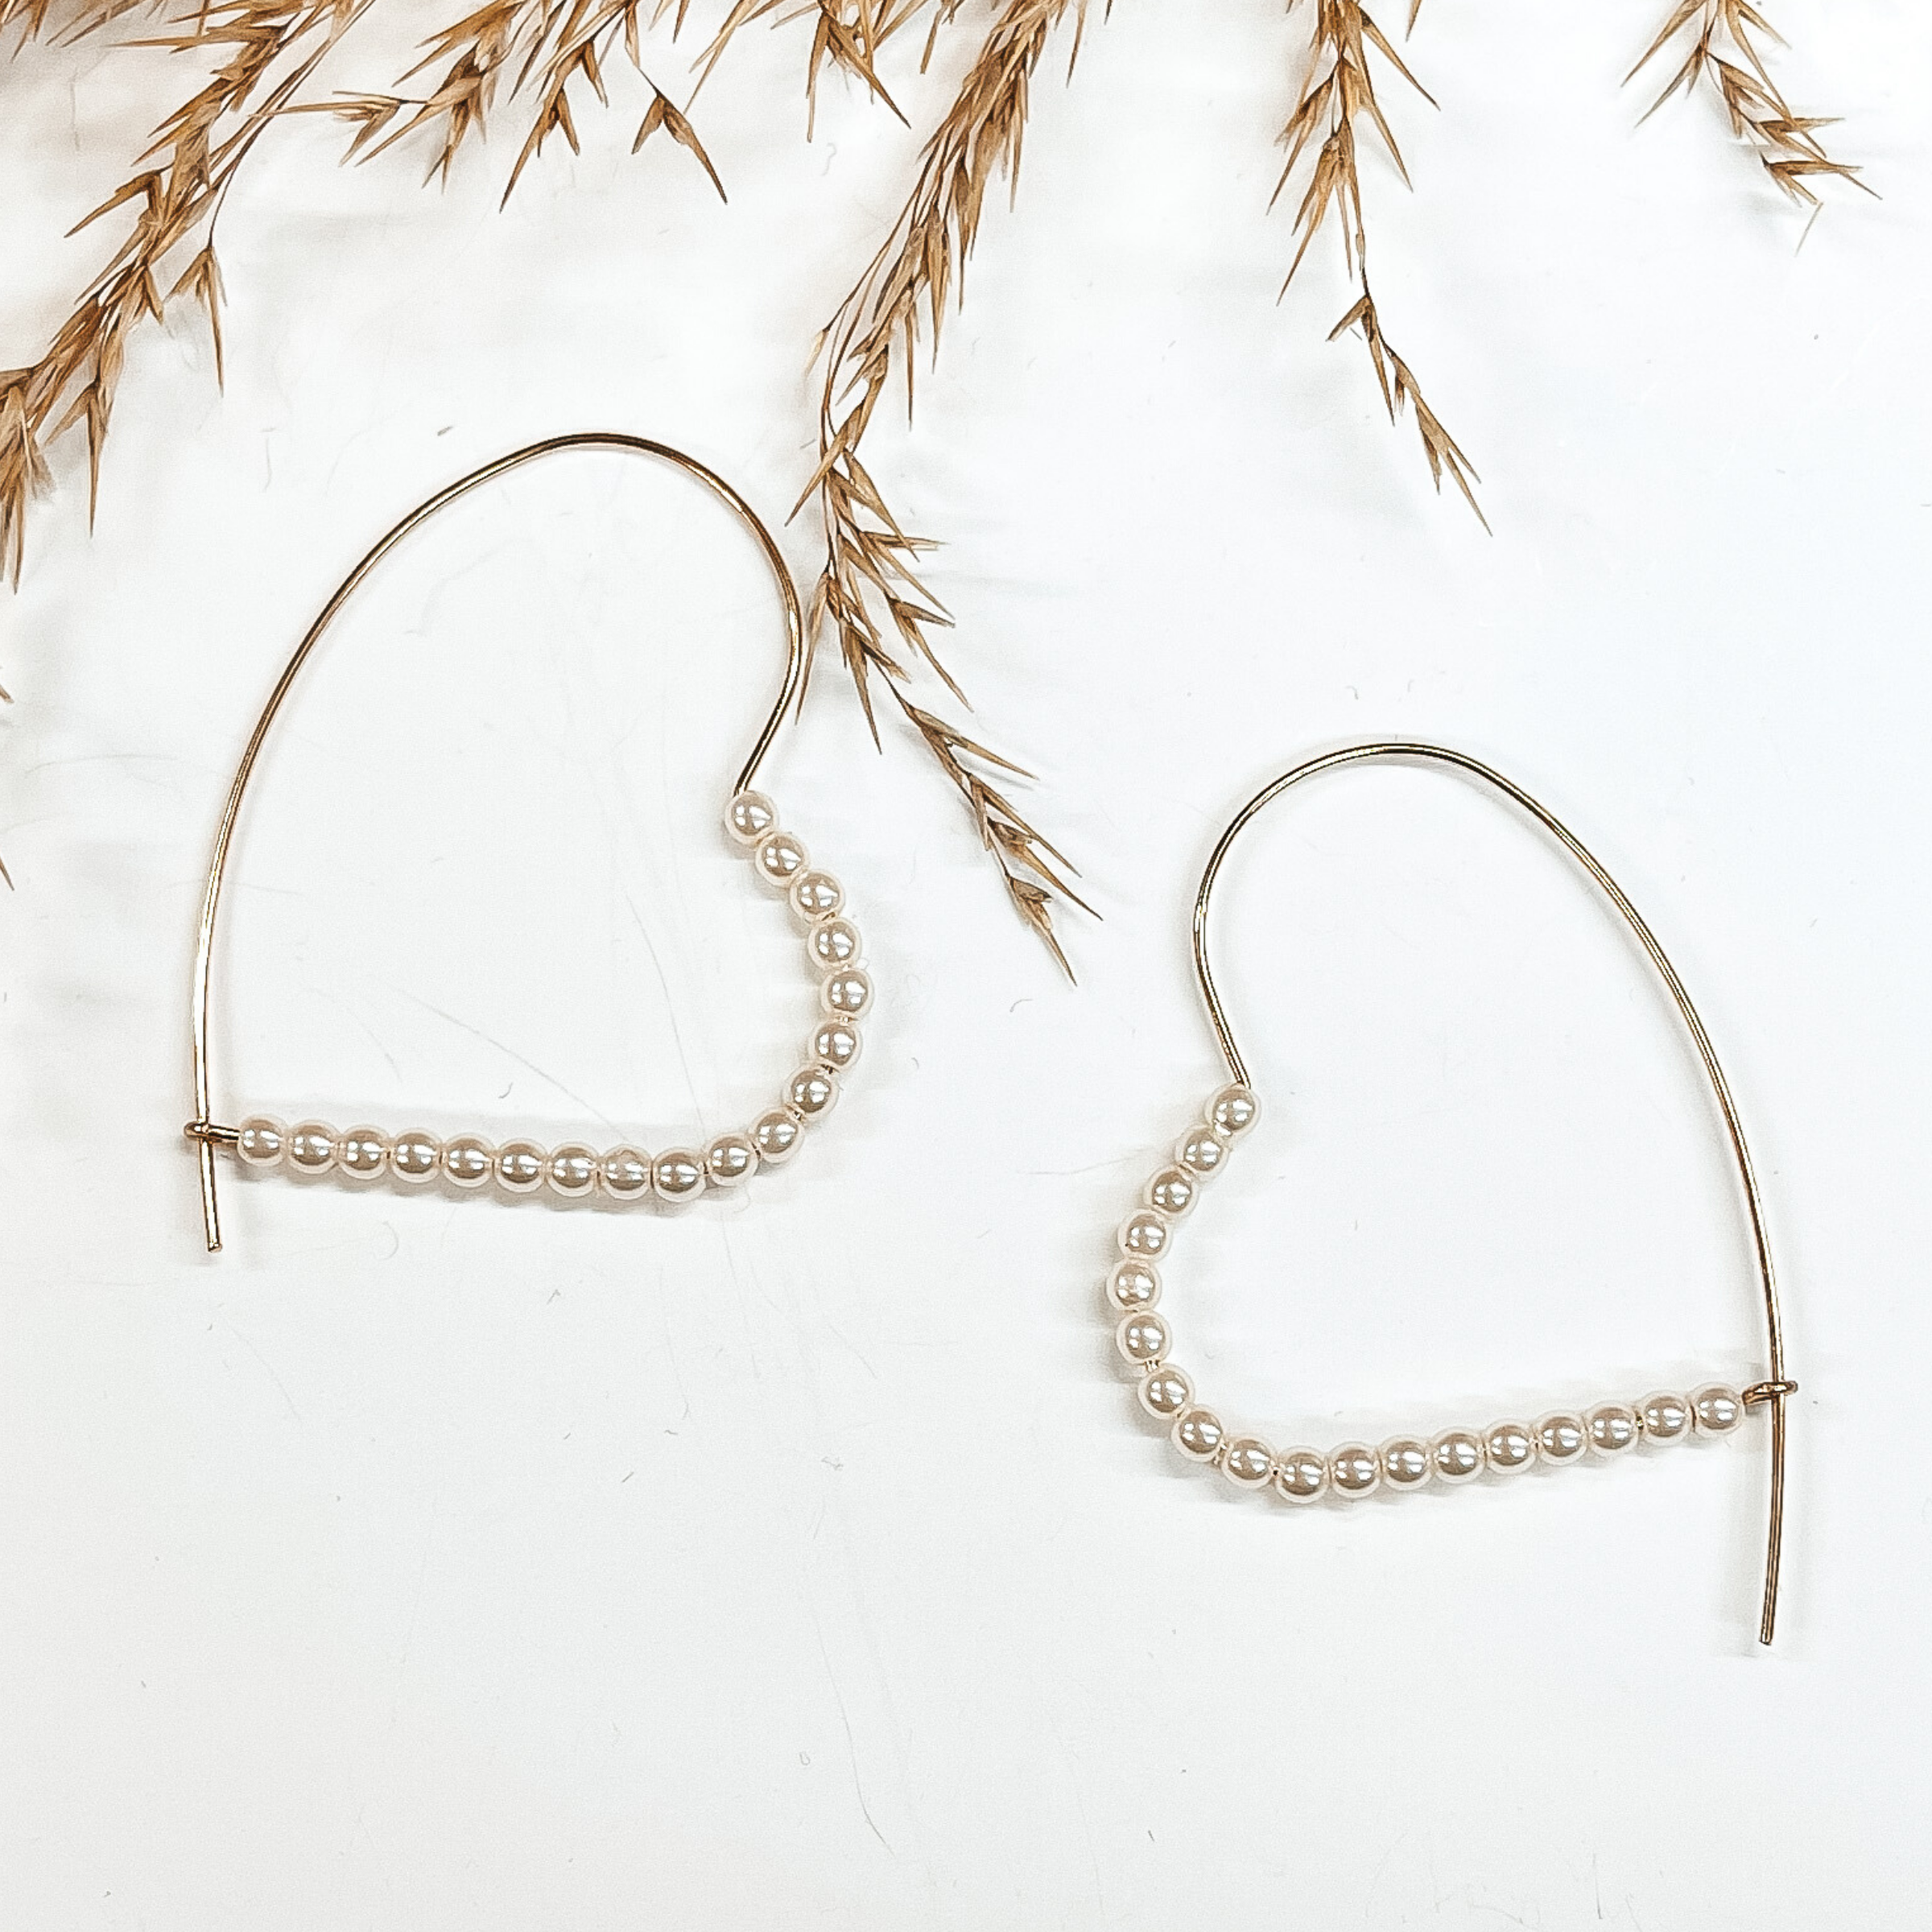 Sweet Darling Kidney Wire Heart Earrings with Pearls in Gold - Giddy Up Glamour Boutique